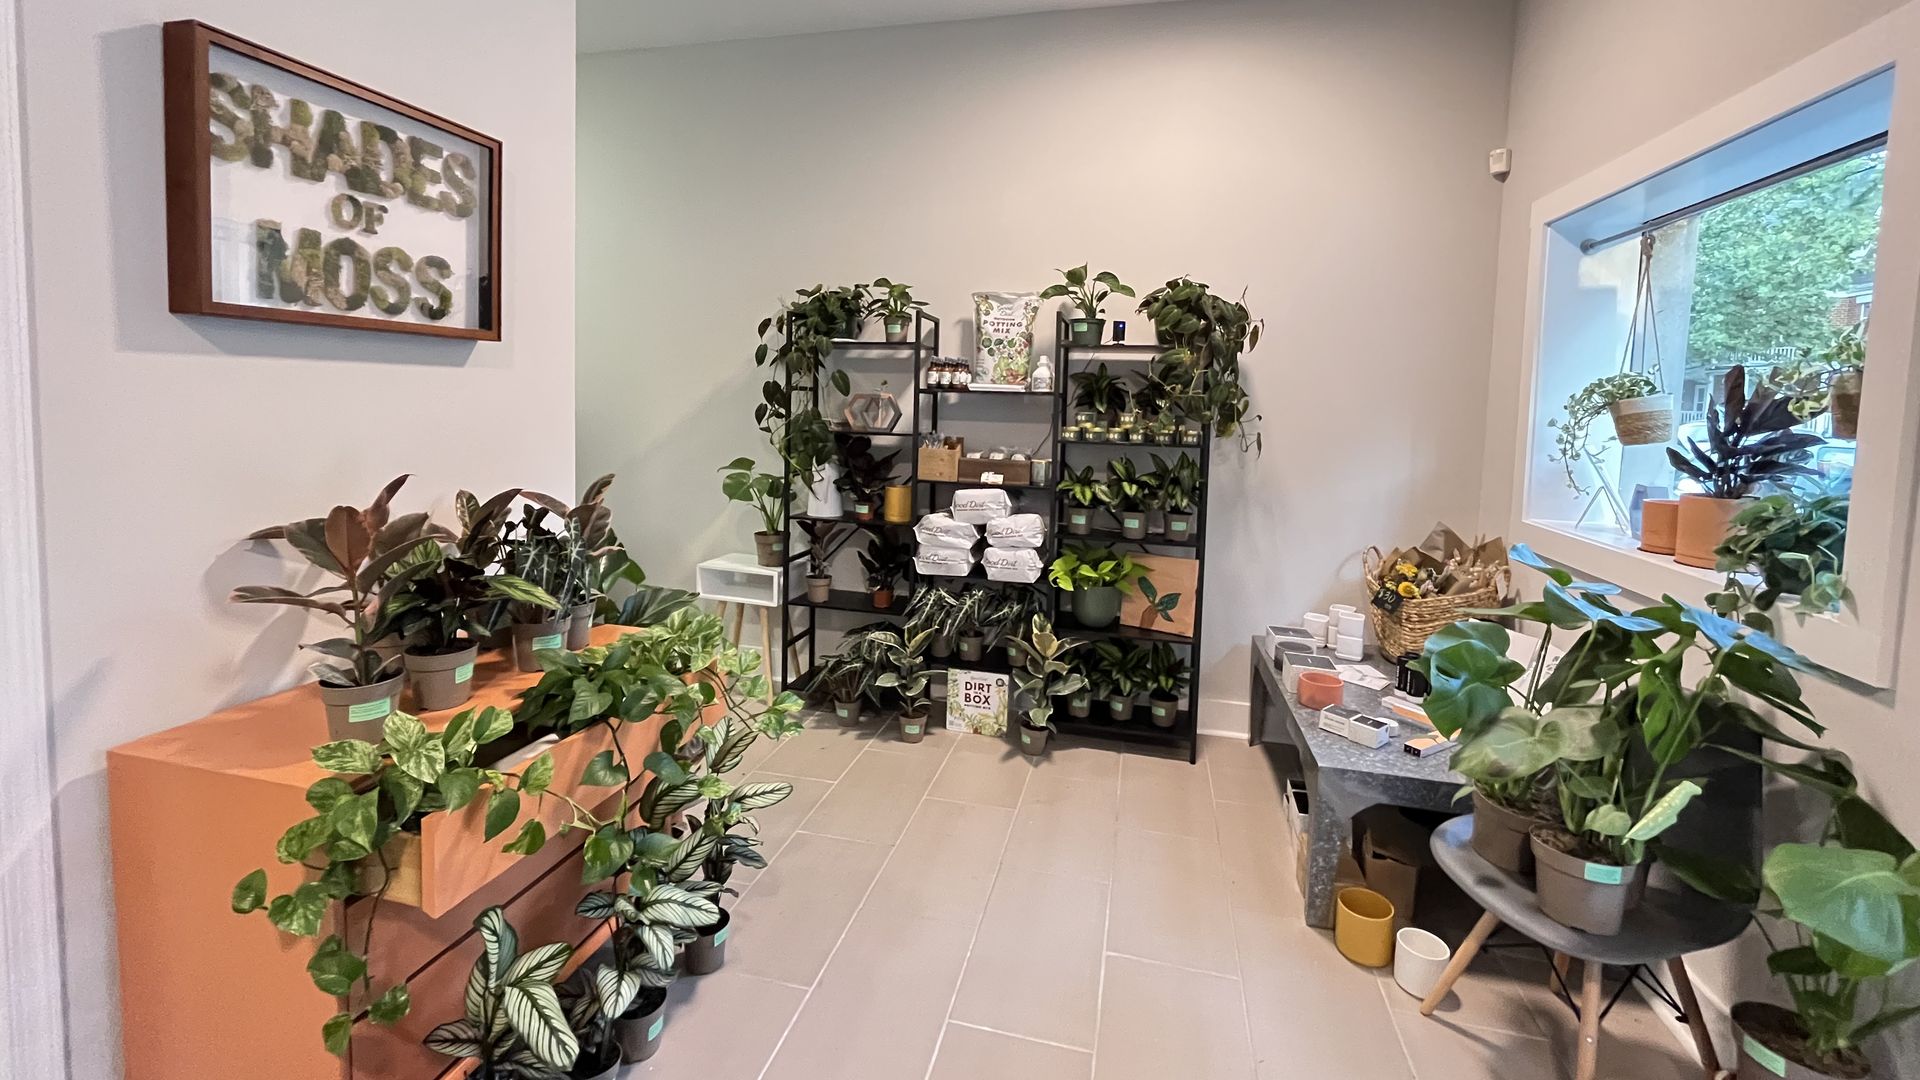 Award-winning plant shop sprouts up in Richmond - Axios Richmond